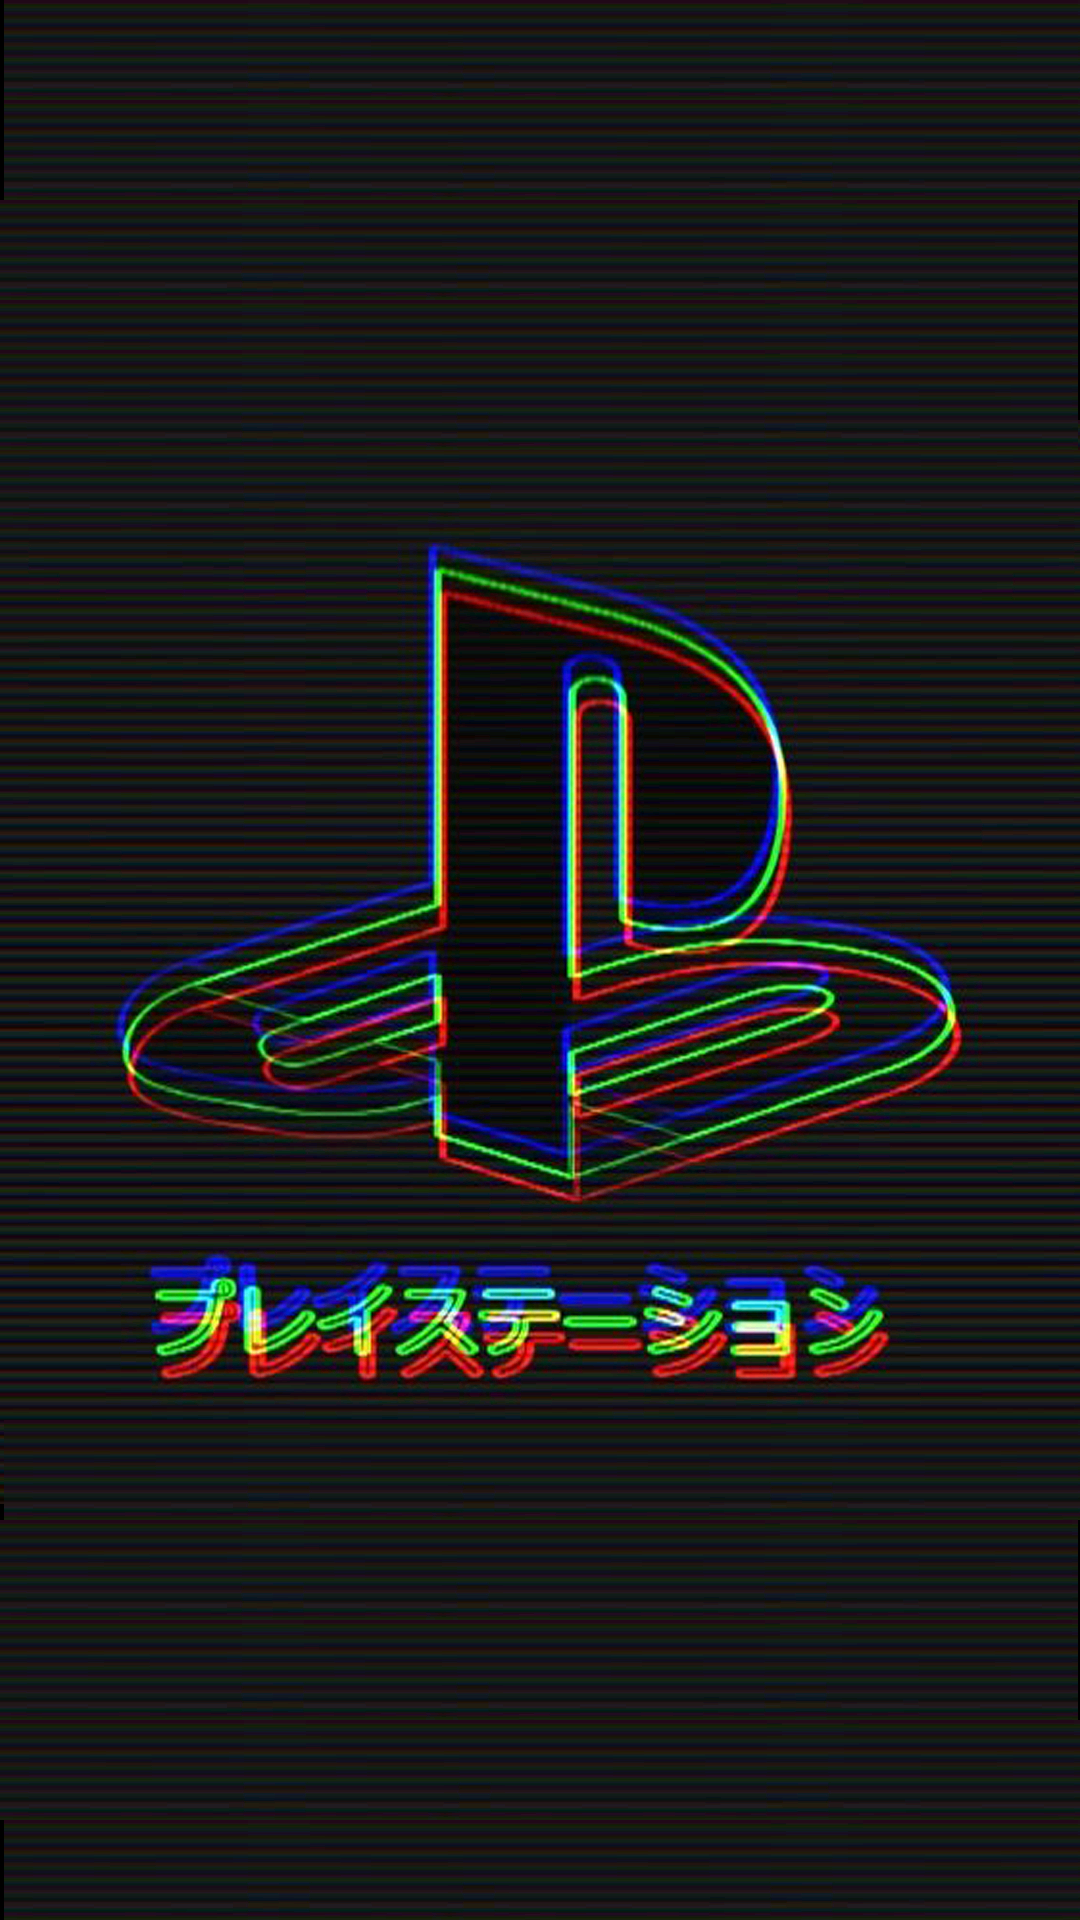 Japanese Aesthetic Ps4 Wallpapers Wallpaper Cave